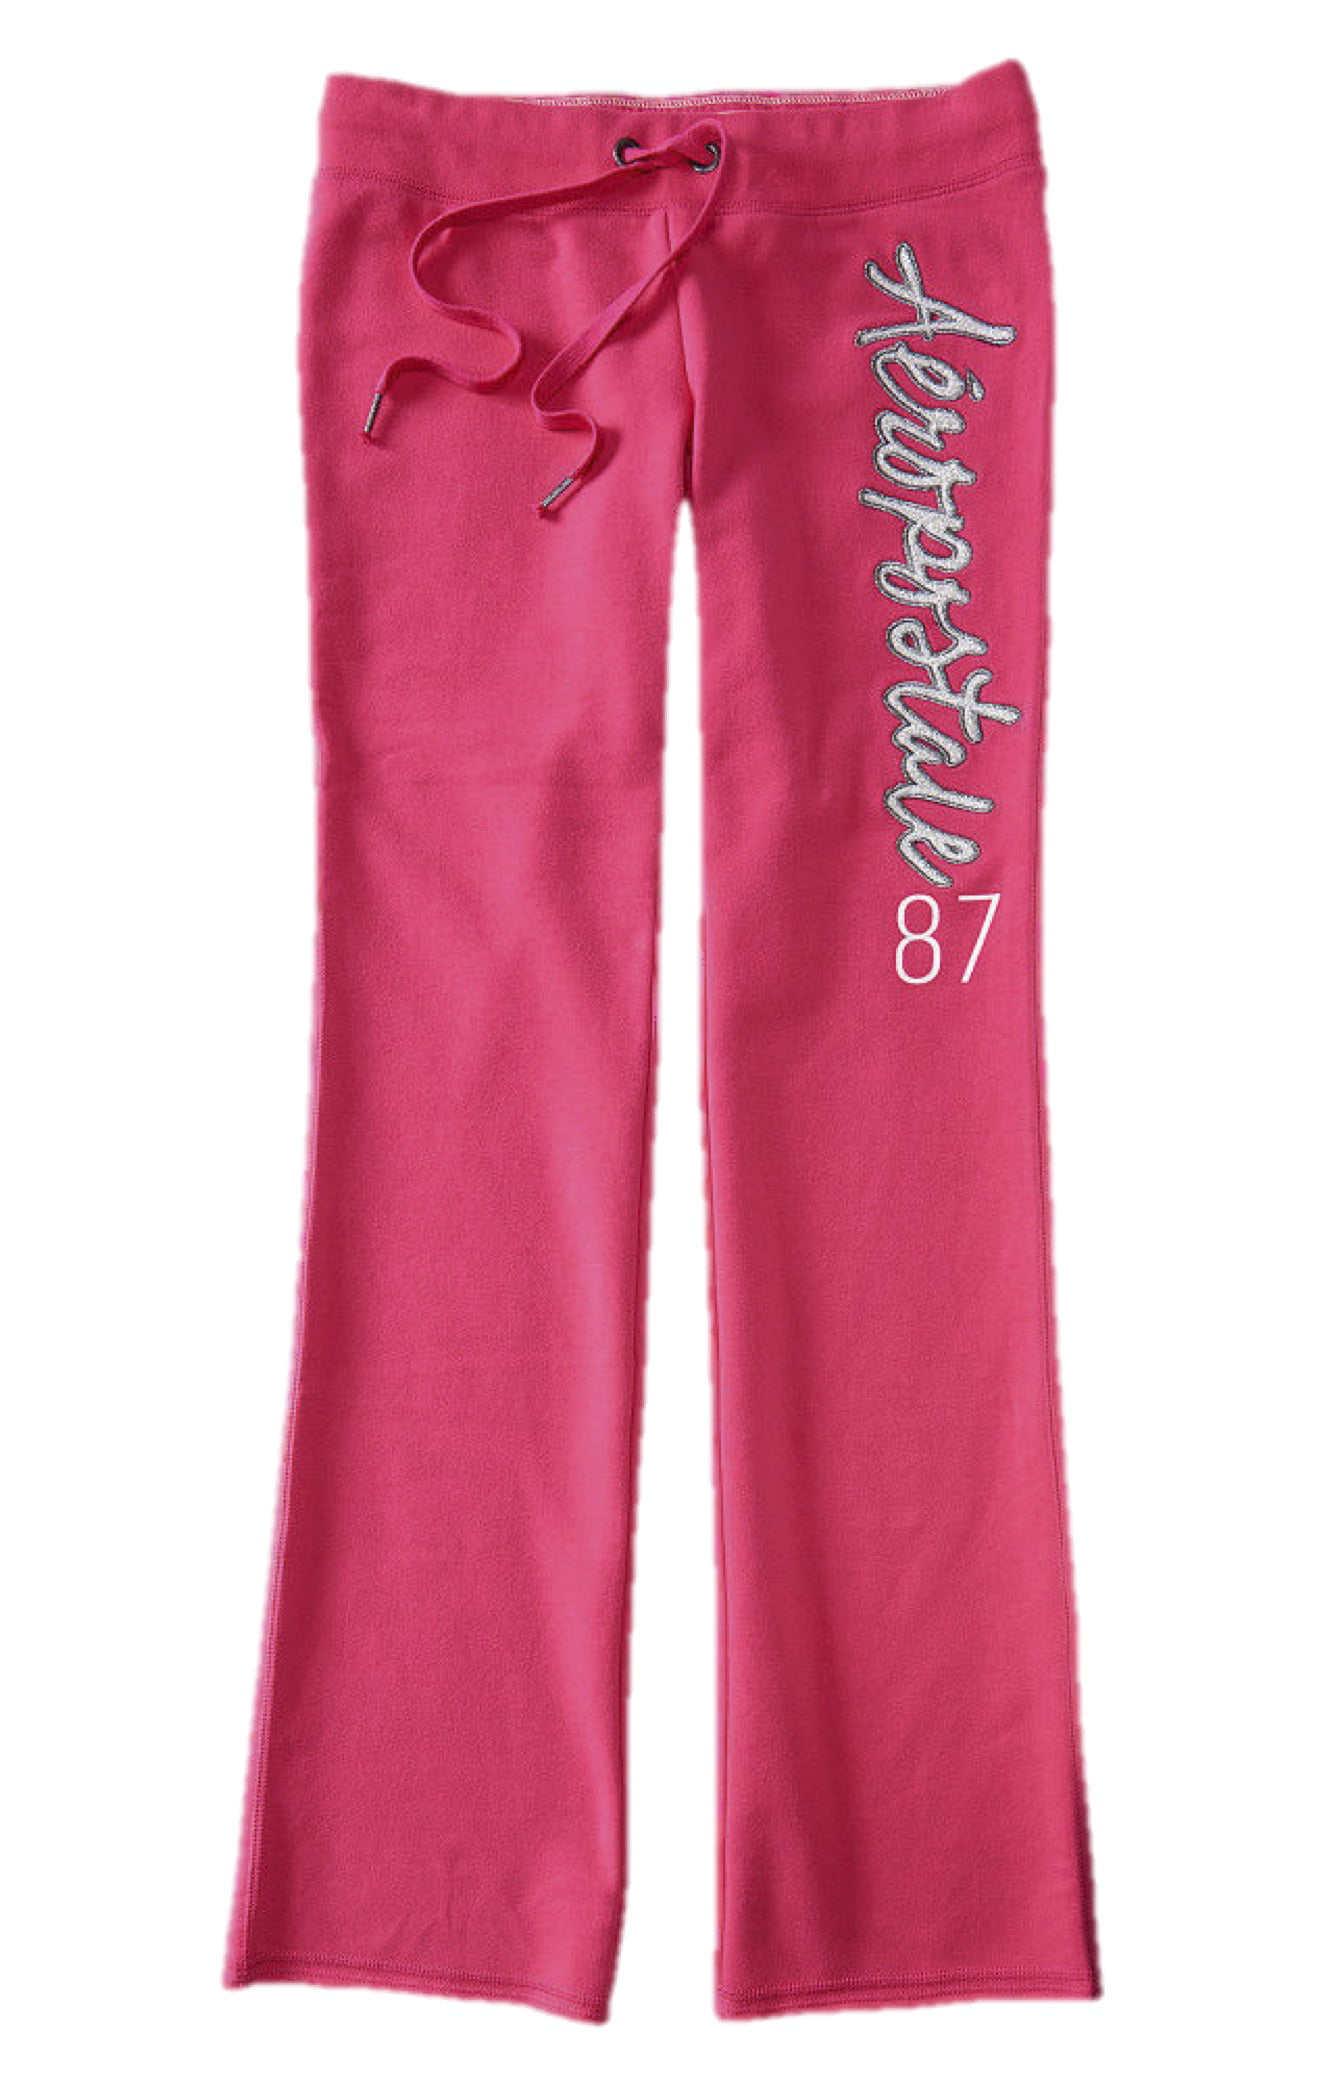 Aeropostale Womens Fit and Flare Sweatpants Glitter Bling 